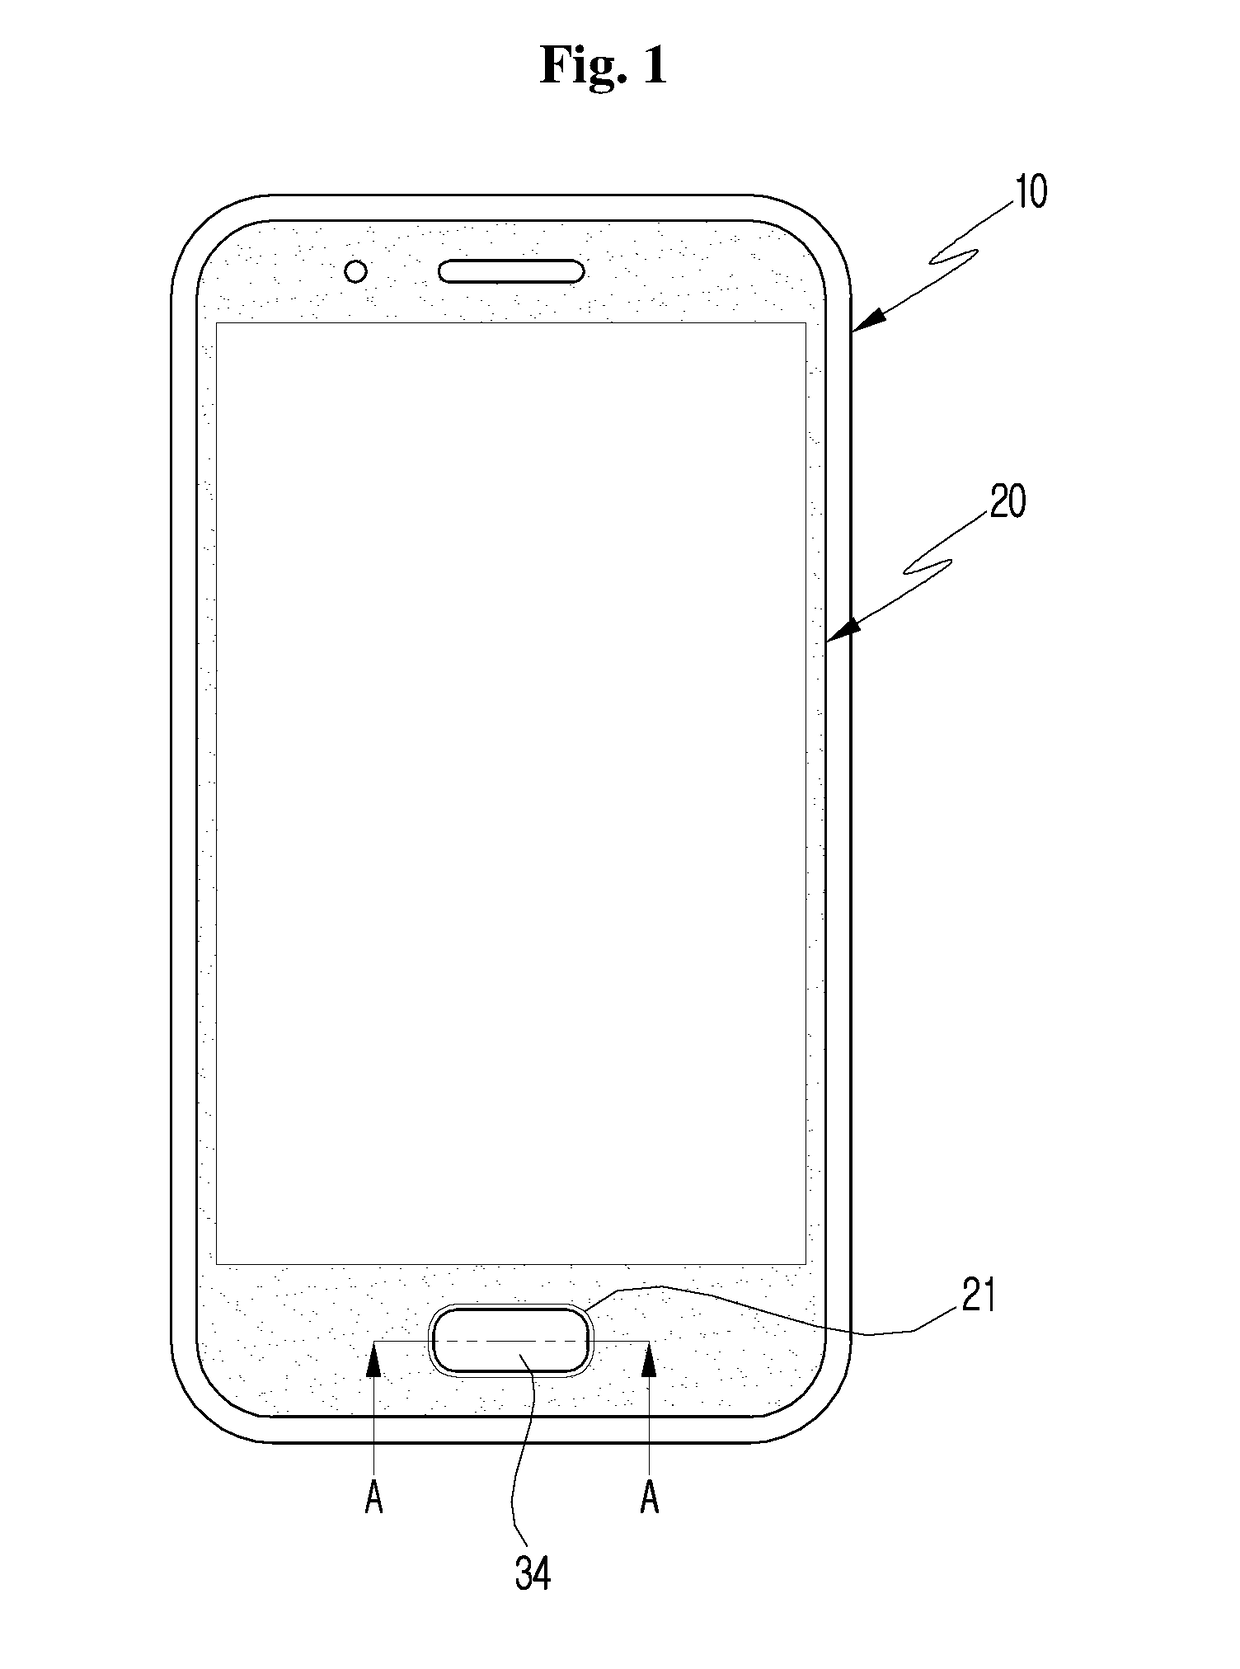 Fingerprint sensor module assembly integrated with cover window for electronic device